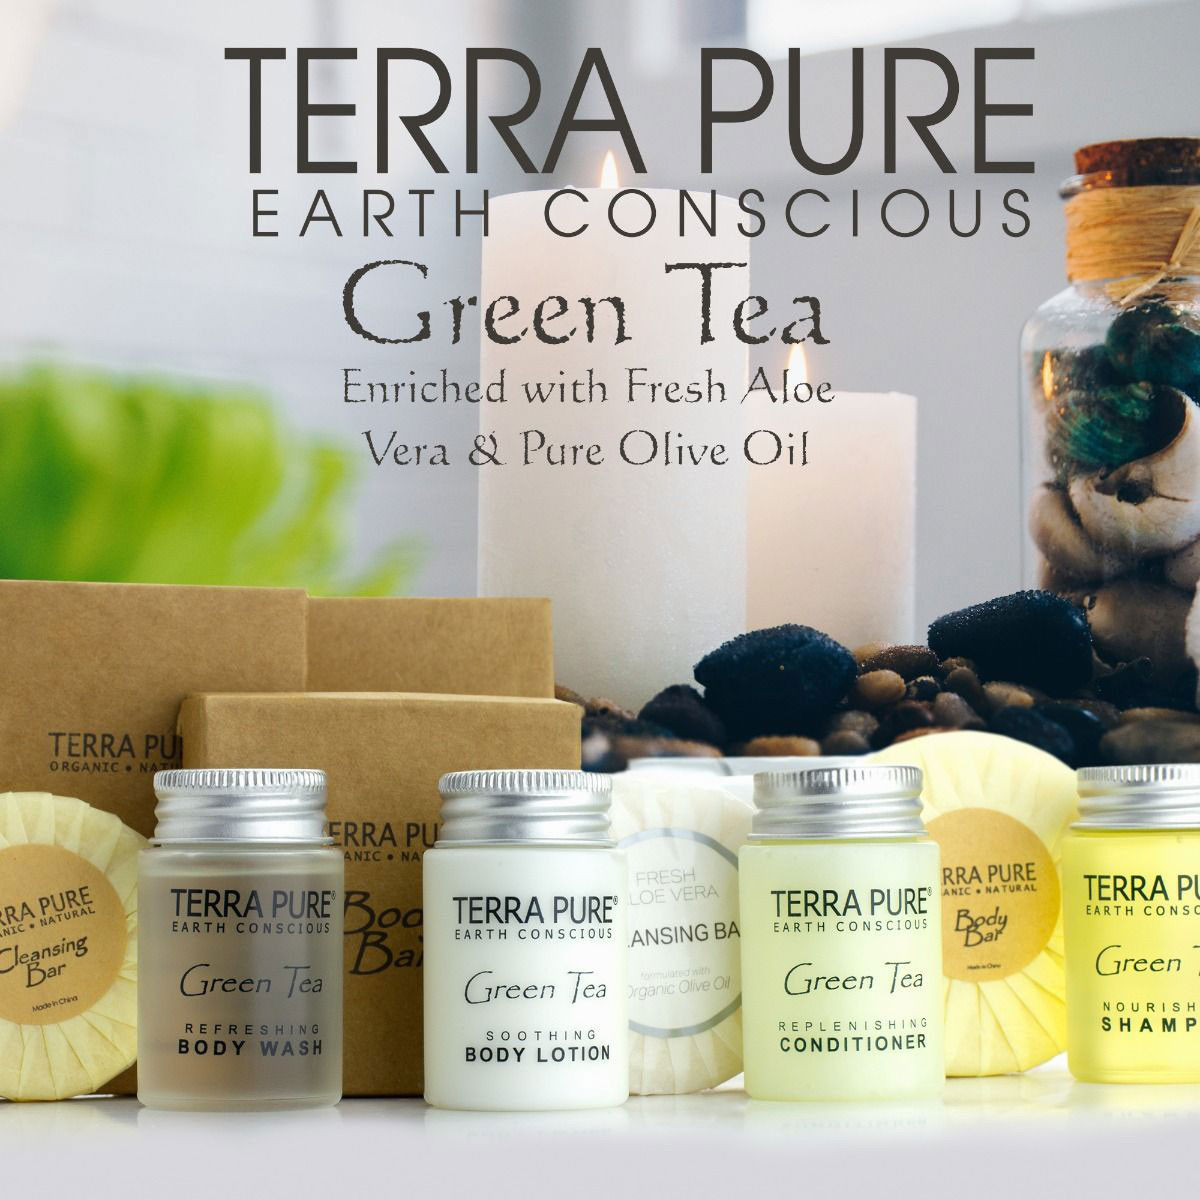 What benefits does the high-end formulation and beautiful design of the TERRA PURE GREEN TEA Collection bring to u